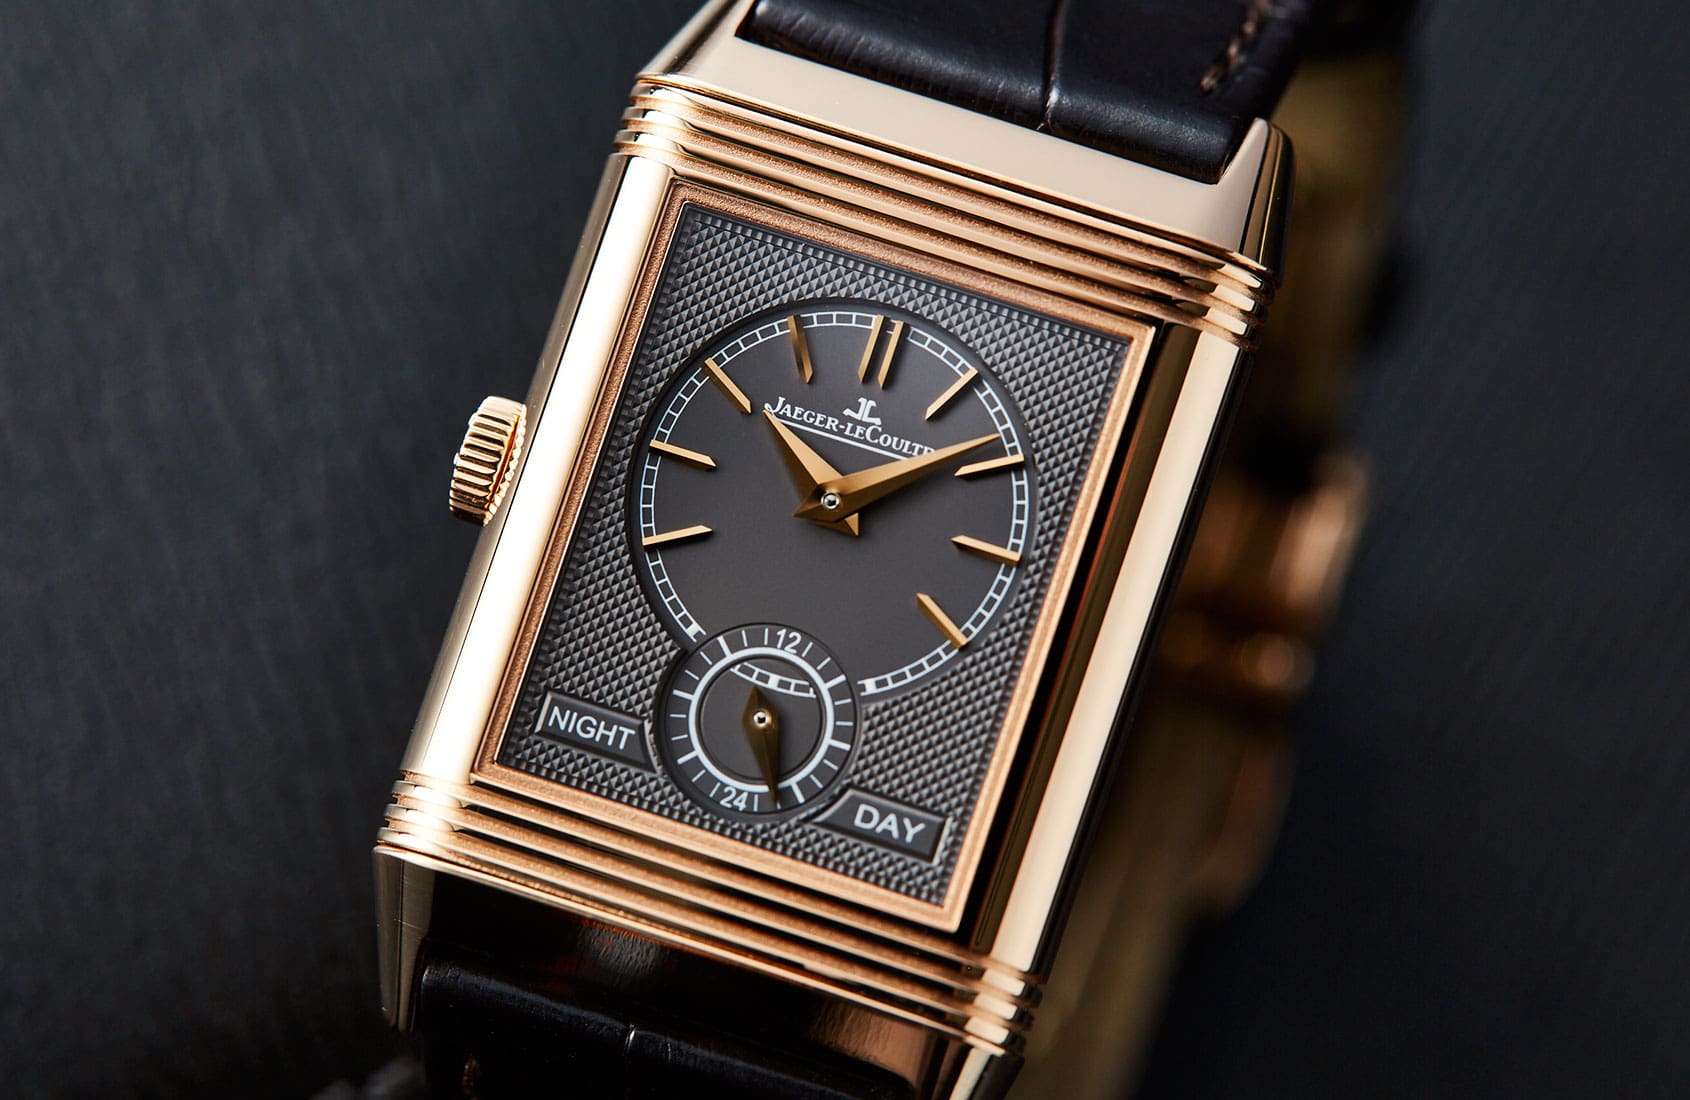 Two faces, both awesome. The Jaeger-LeCoultre Reverso Tribute Duoface in pink gold